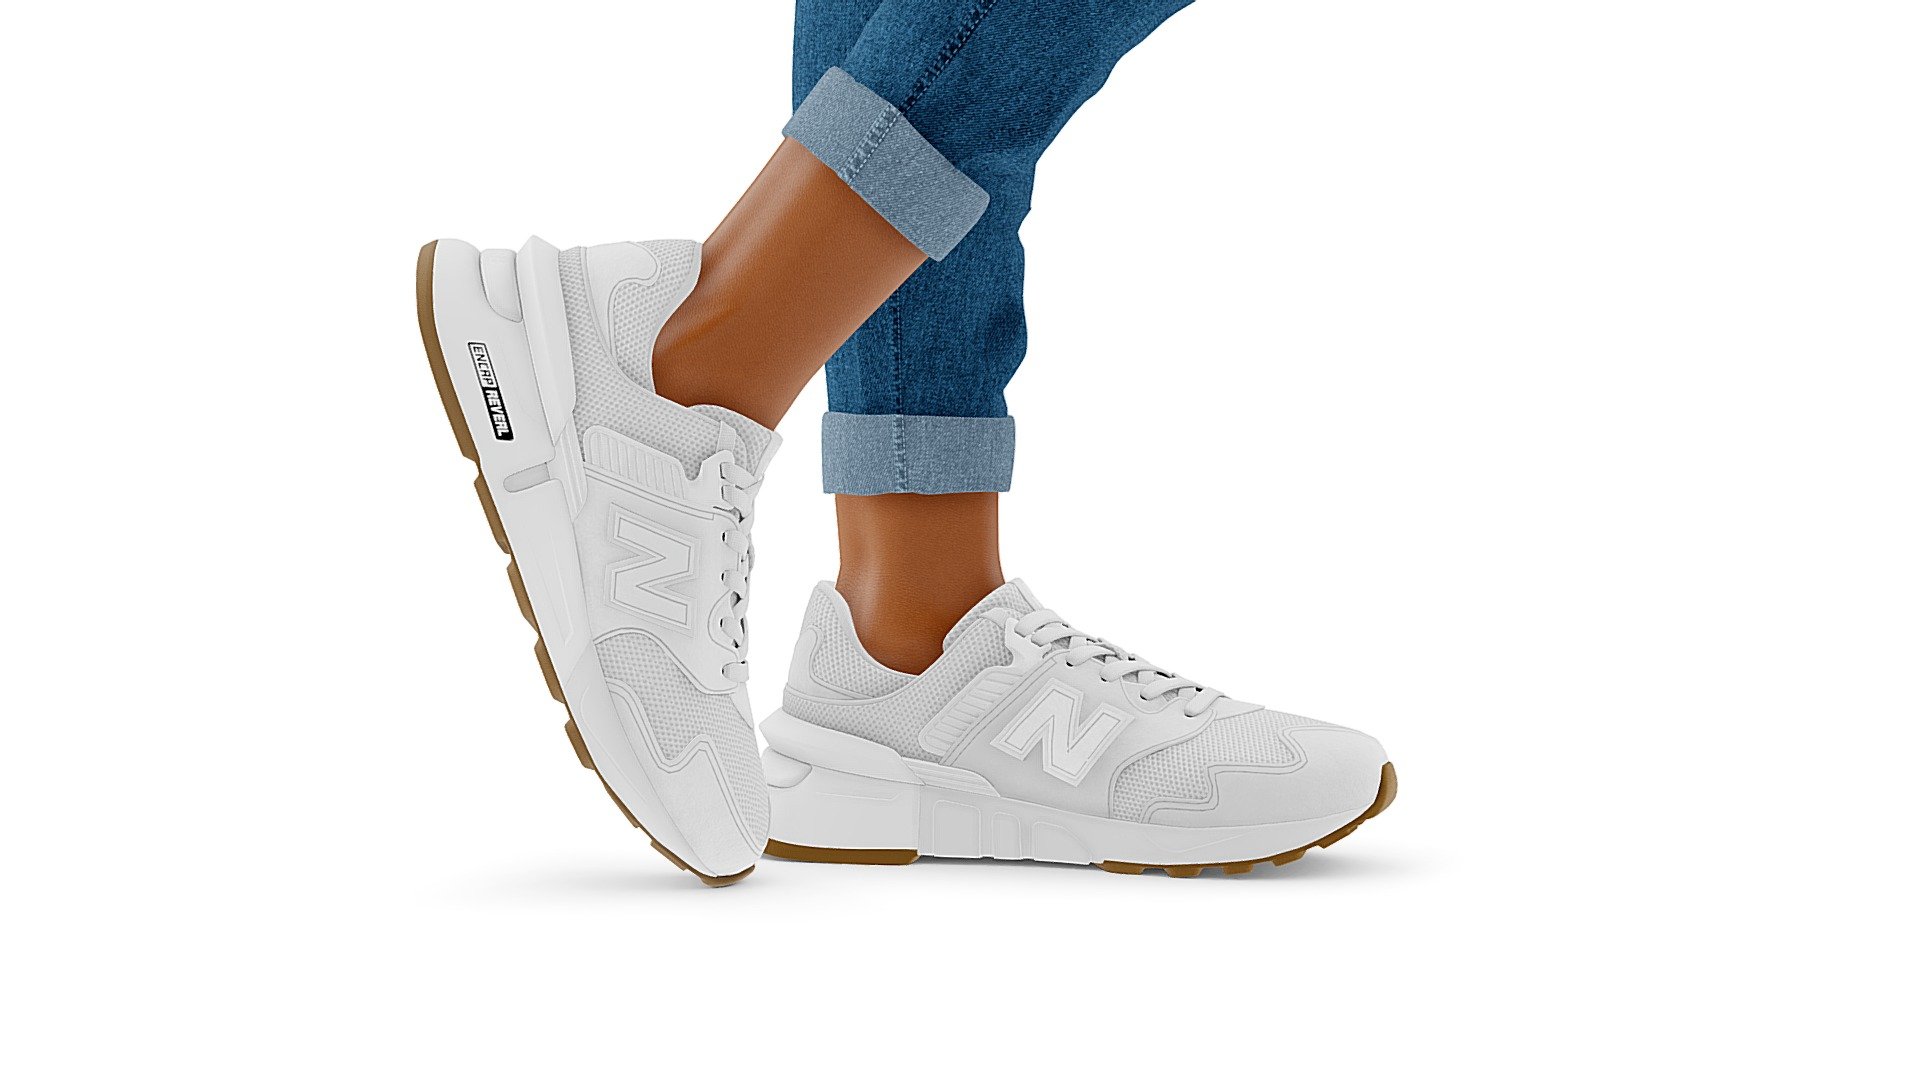 This model was created for New Balance configurator demo. Tapmod Studio 2020 - New Balance 997 with legs - 3D model by TapMod 3d model